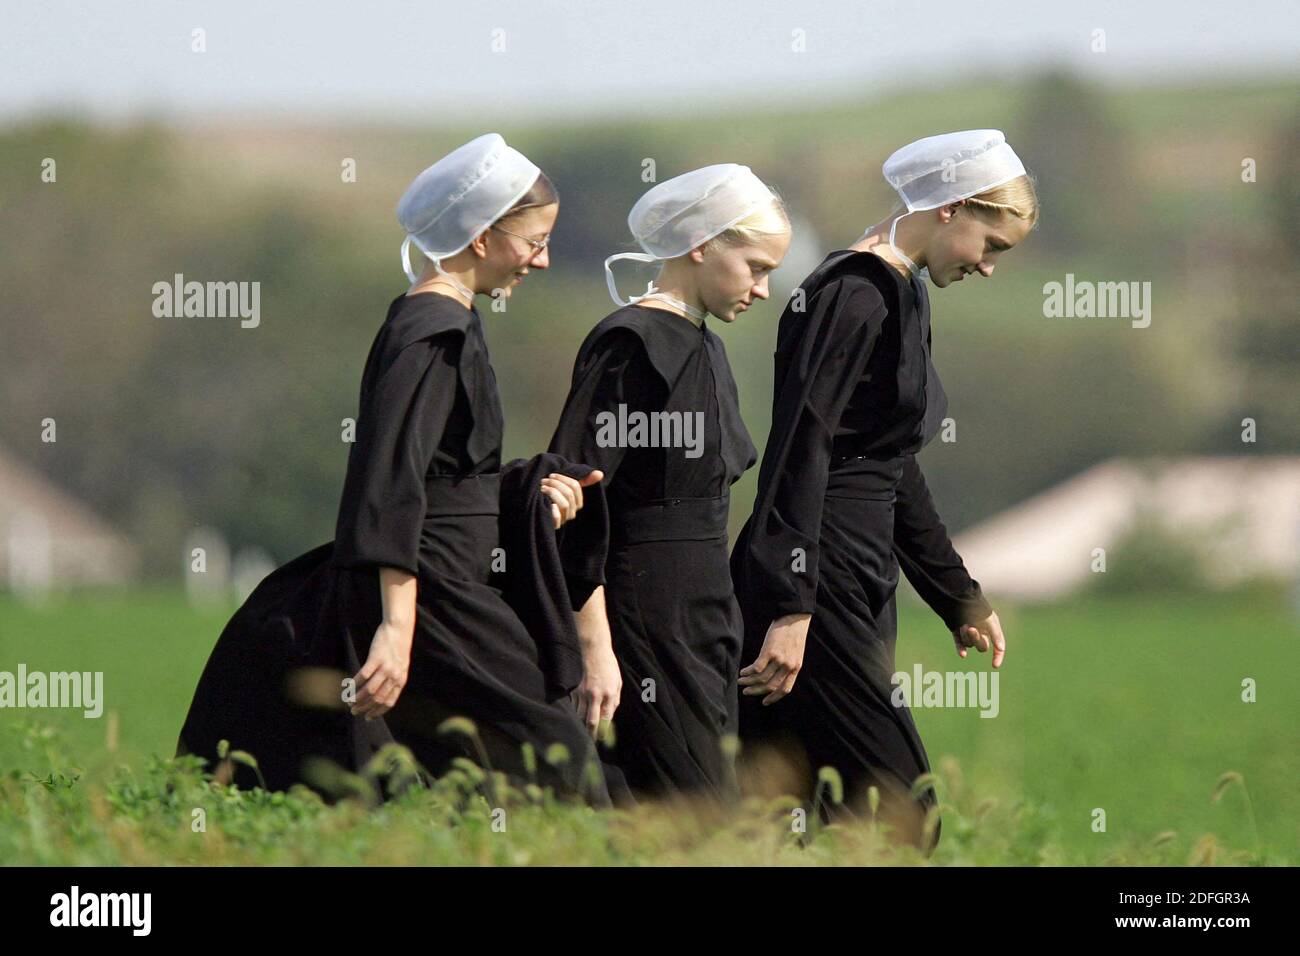 NO FILM, NO VIDEO, NO TV, NO DOCUMENTARY - File photo dated October 3, 2006 of three Amish girls walk through a field on their way to a prayer service in Nickel Mines, PA, USA. In a speech on September 14 French President Emmanuel Macron dismissed reservations about 5G telecom infrastructure in remarks about “going back to the oil lamp” and living like the Amish, a Christian fellowship known for its reluctance to adopt modern technology. Photo by David Swanson/Philadelphia Inquirer/TNS/ABACAPRESS.COM NO FILM, NO VIDEO, NO TV, NO DOCUMENTARY - File photo dated October 3, 2006 of three Amish gir Stock Photo